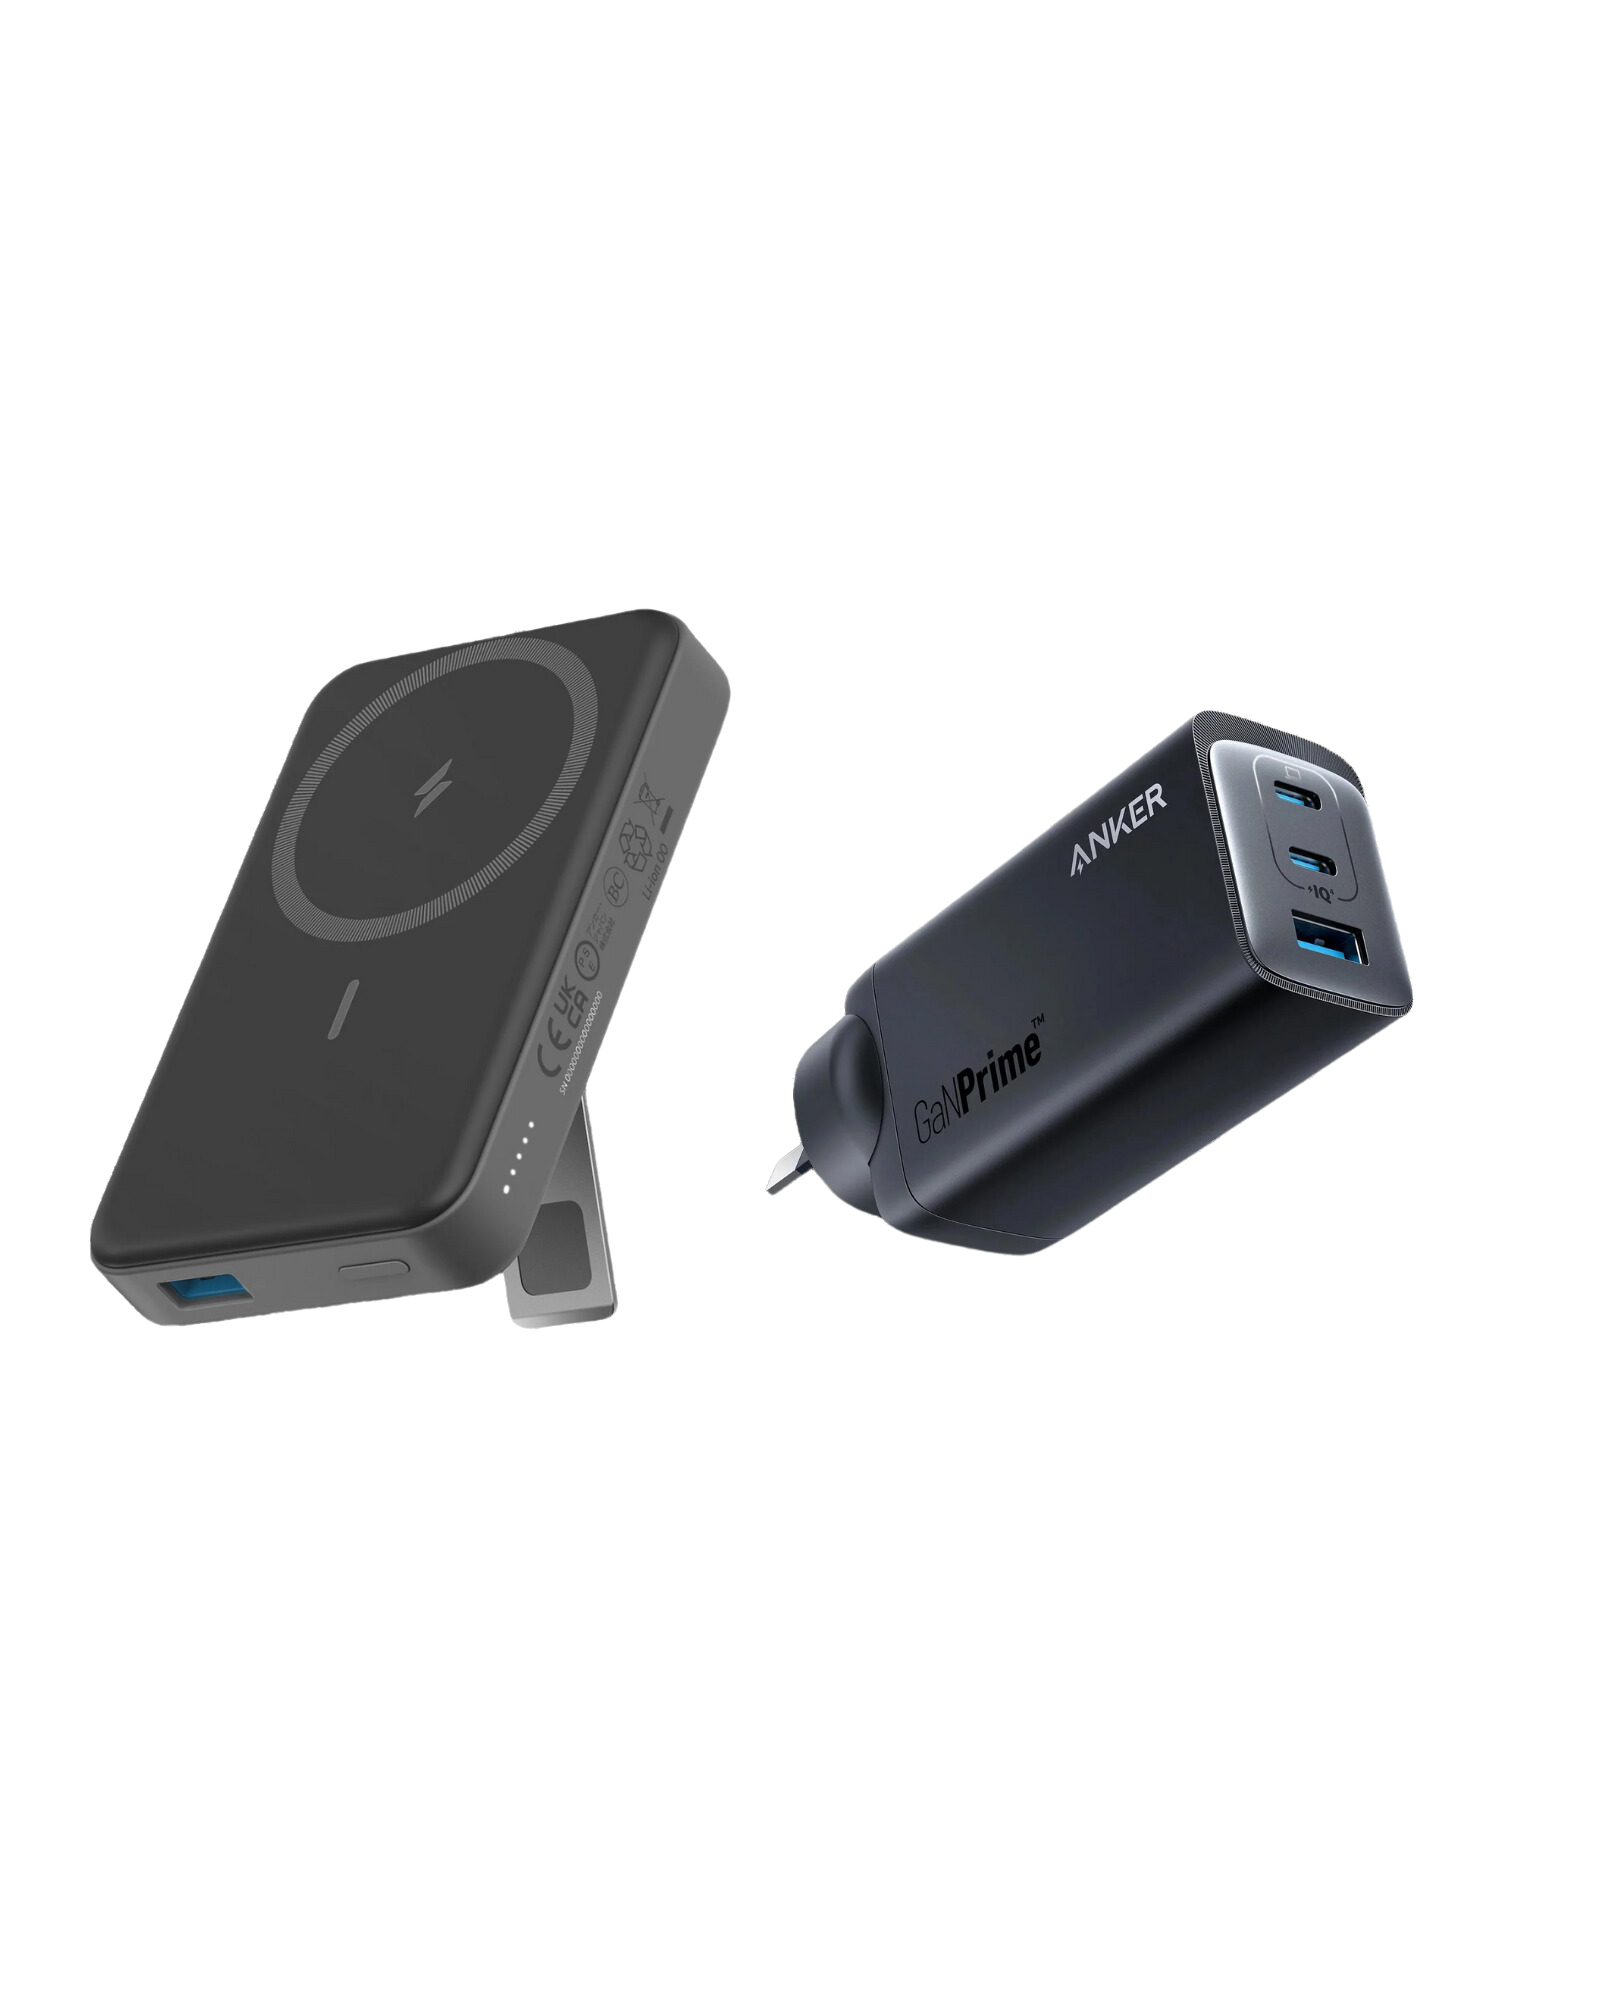 Anker <b>737</b> Charger (GaNPrime 120W) and Anker <b>633</b> Magnetic Battery